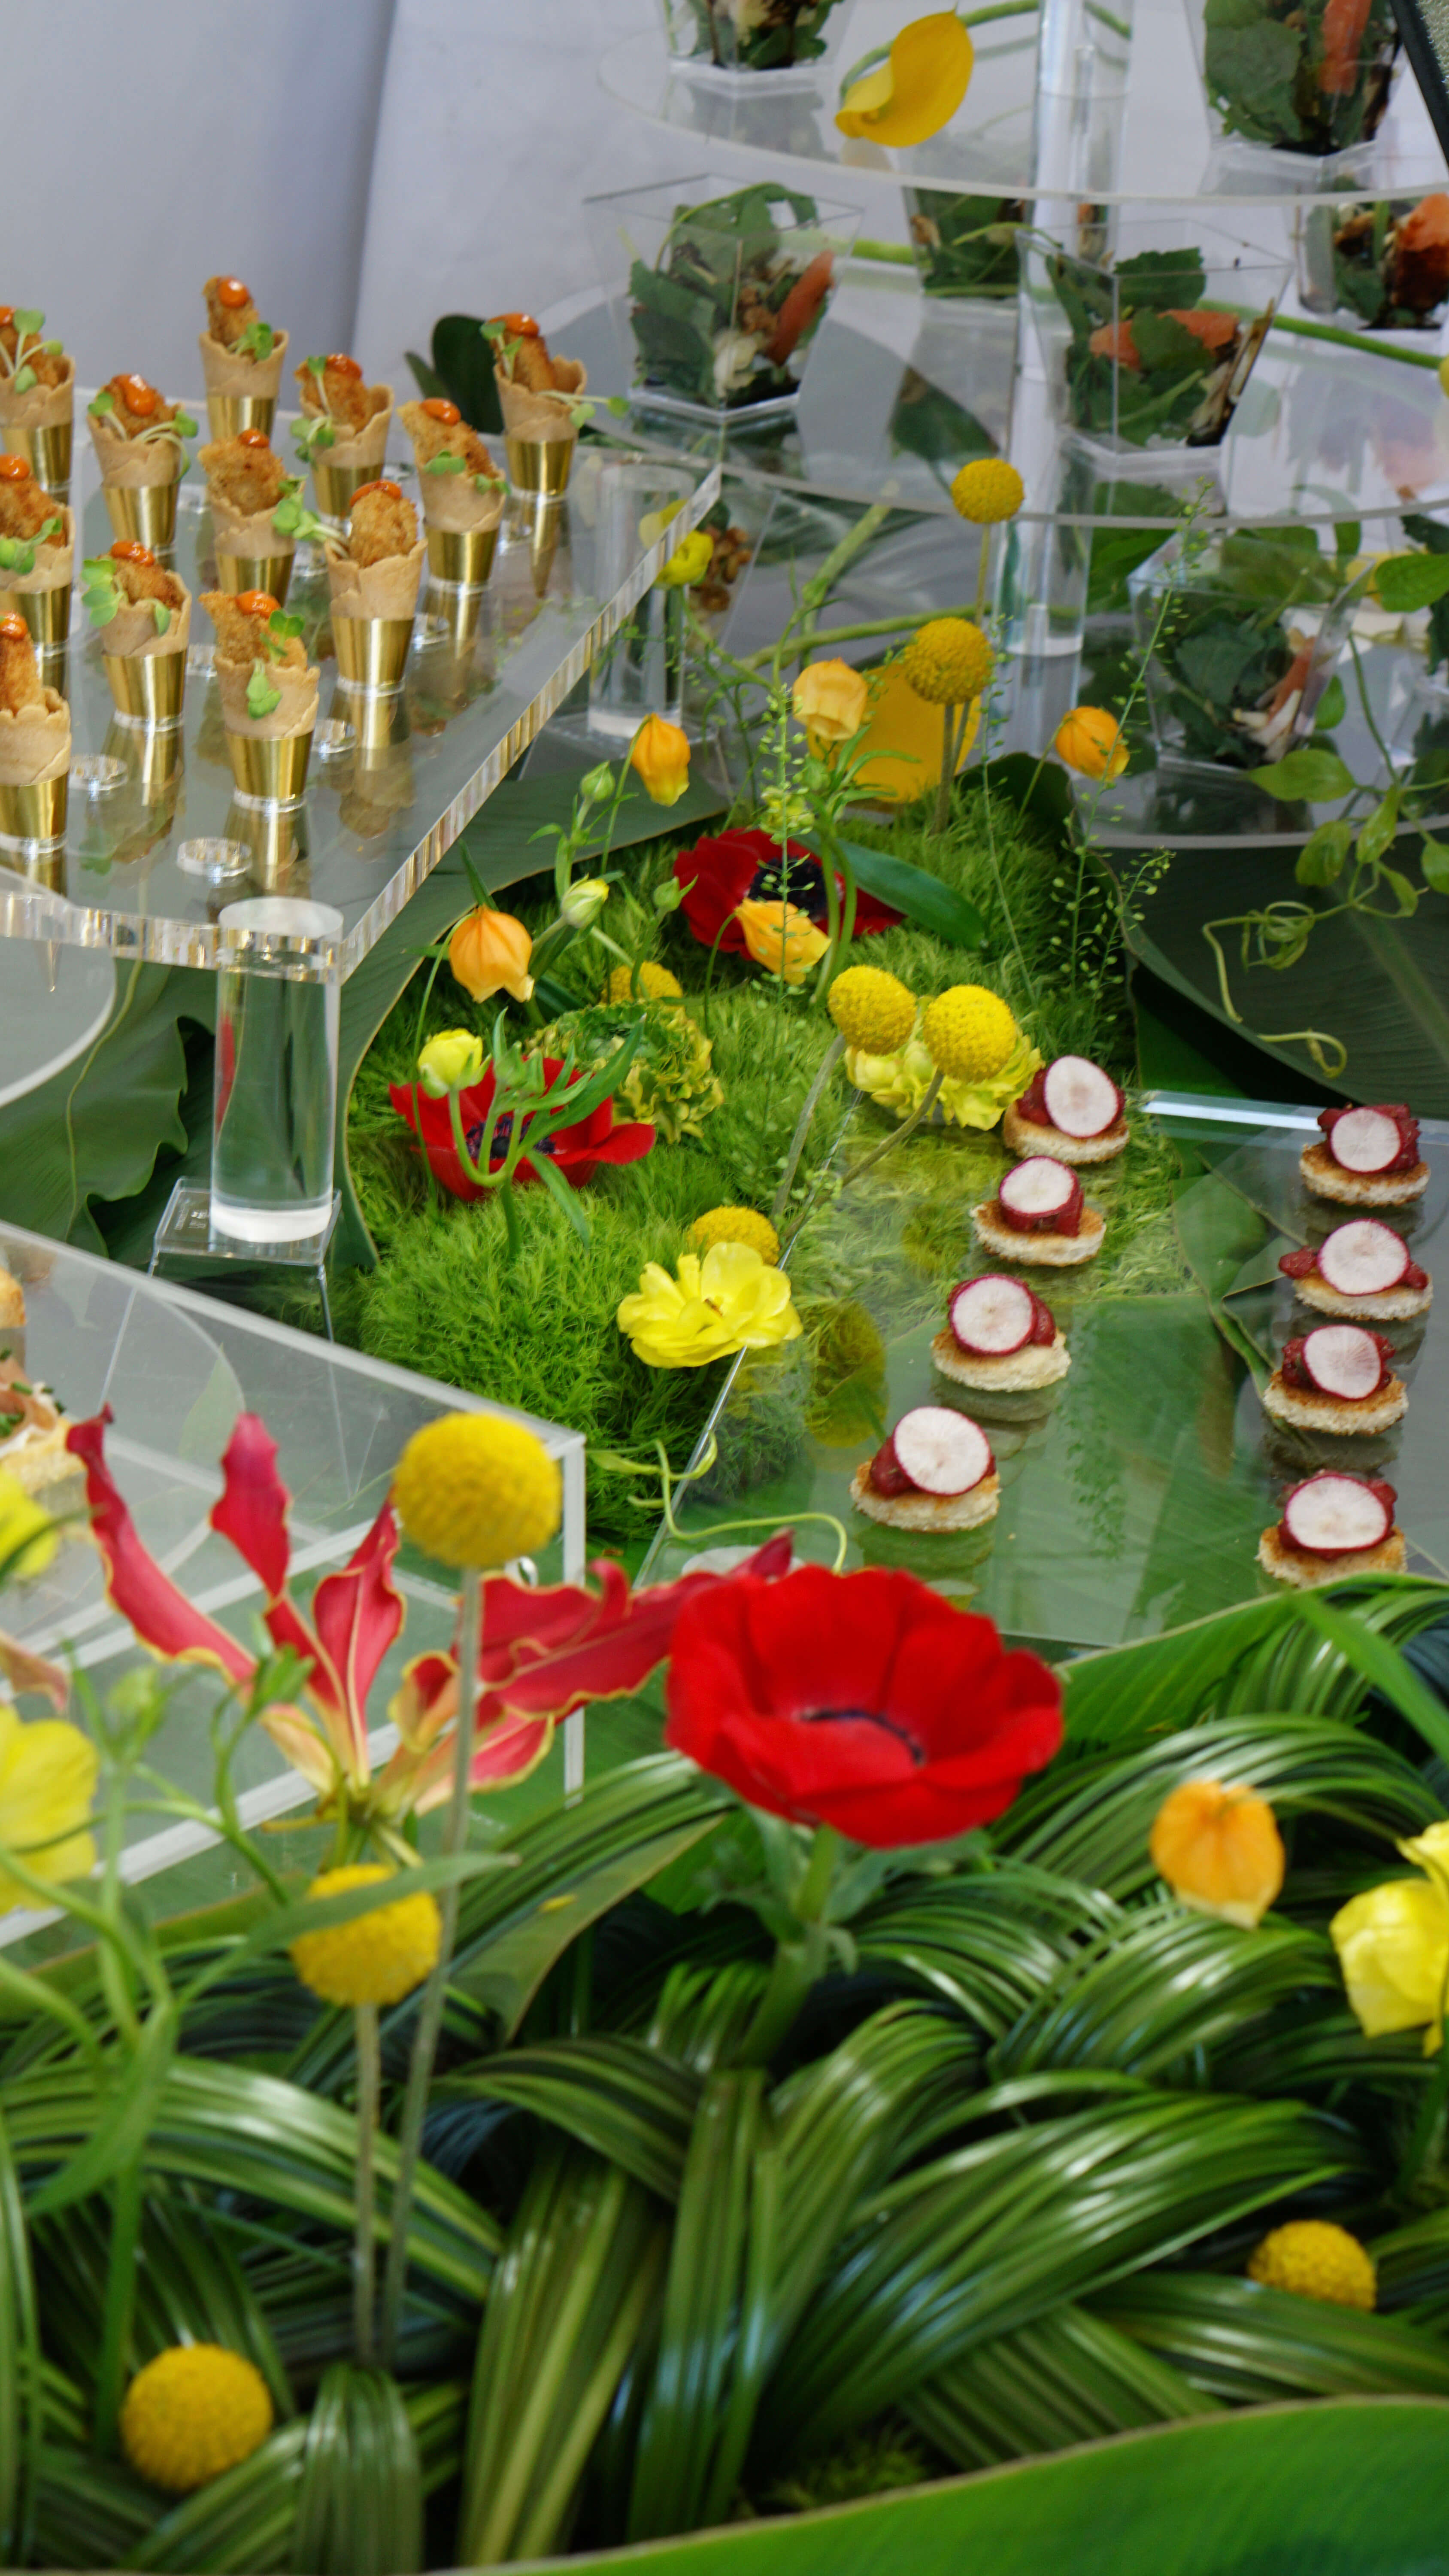 Green food station design incorporating multiple hors d'oeuvres and red and yellow flowers